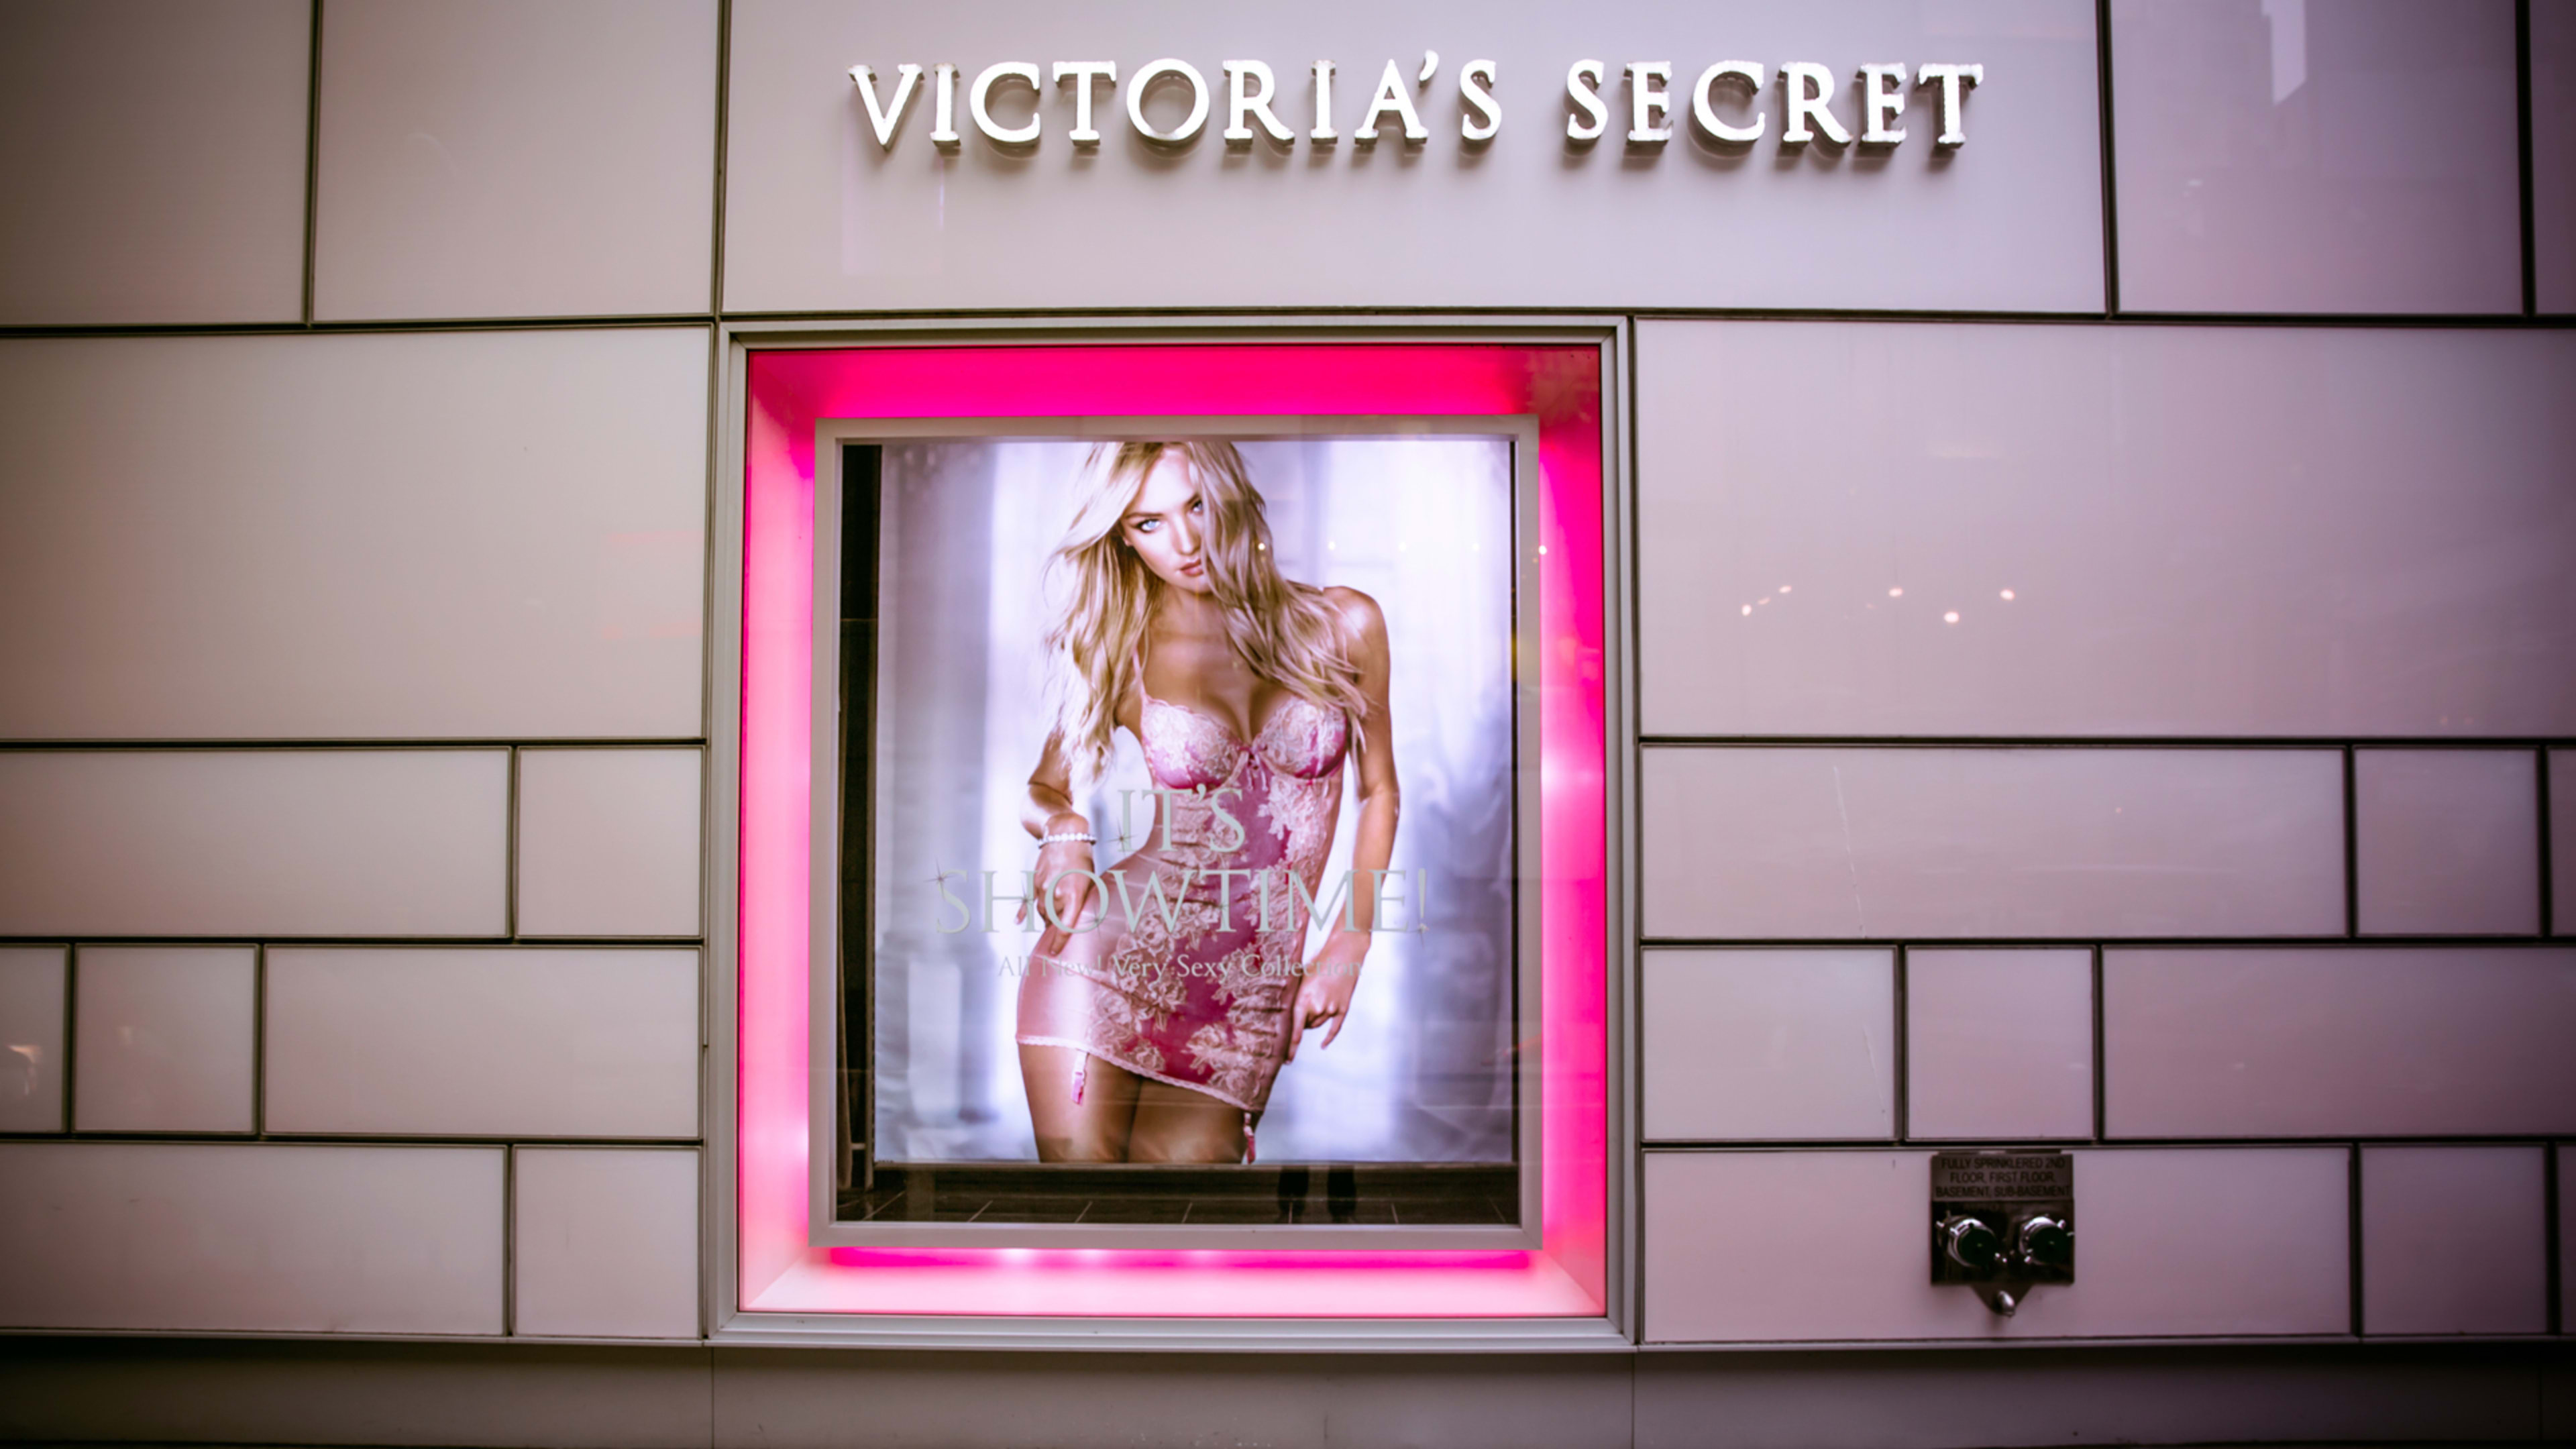 Basically, nobody wants to buy Victoria’s Secret anymore—even on sale